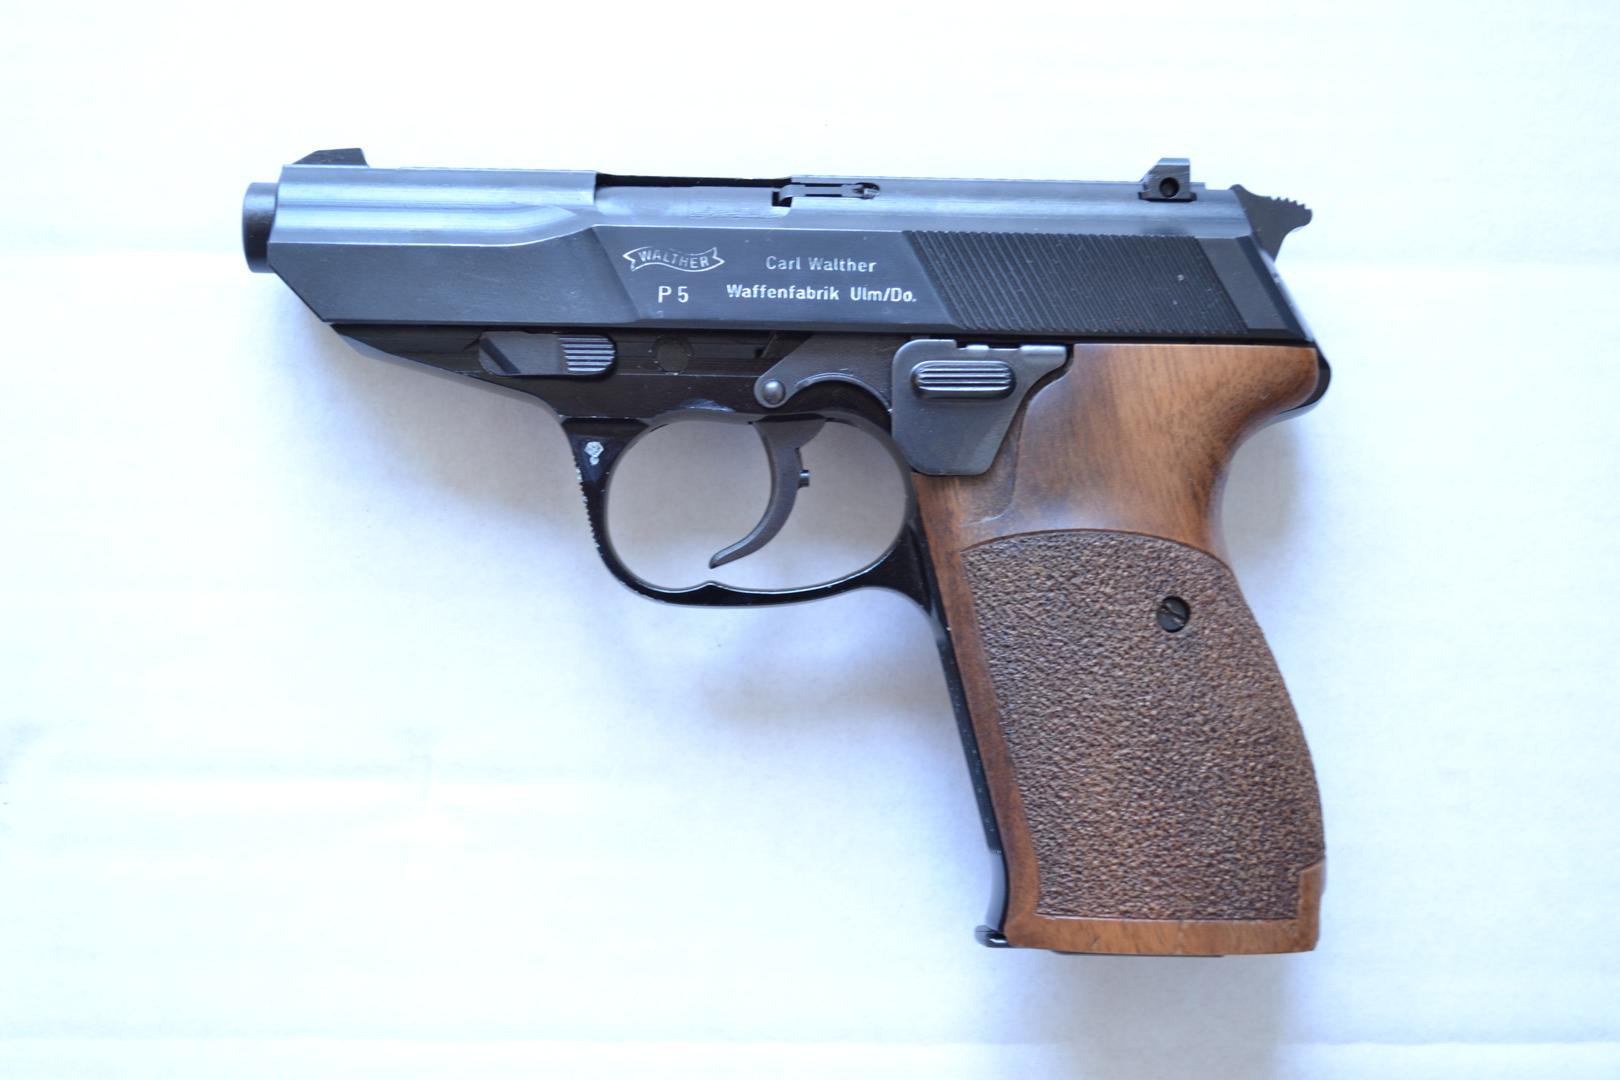 Walther P5 prototype early variation